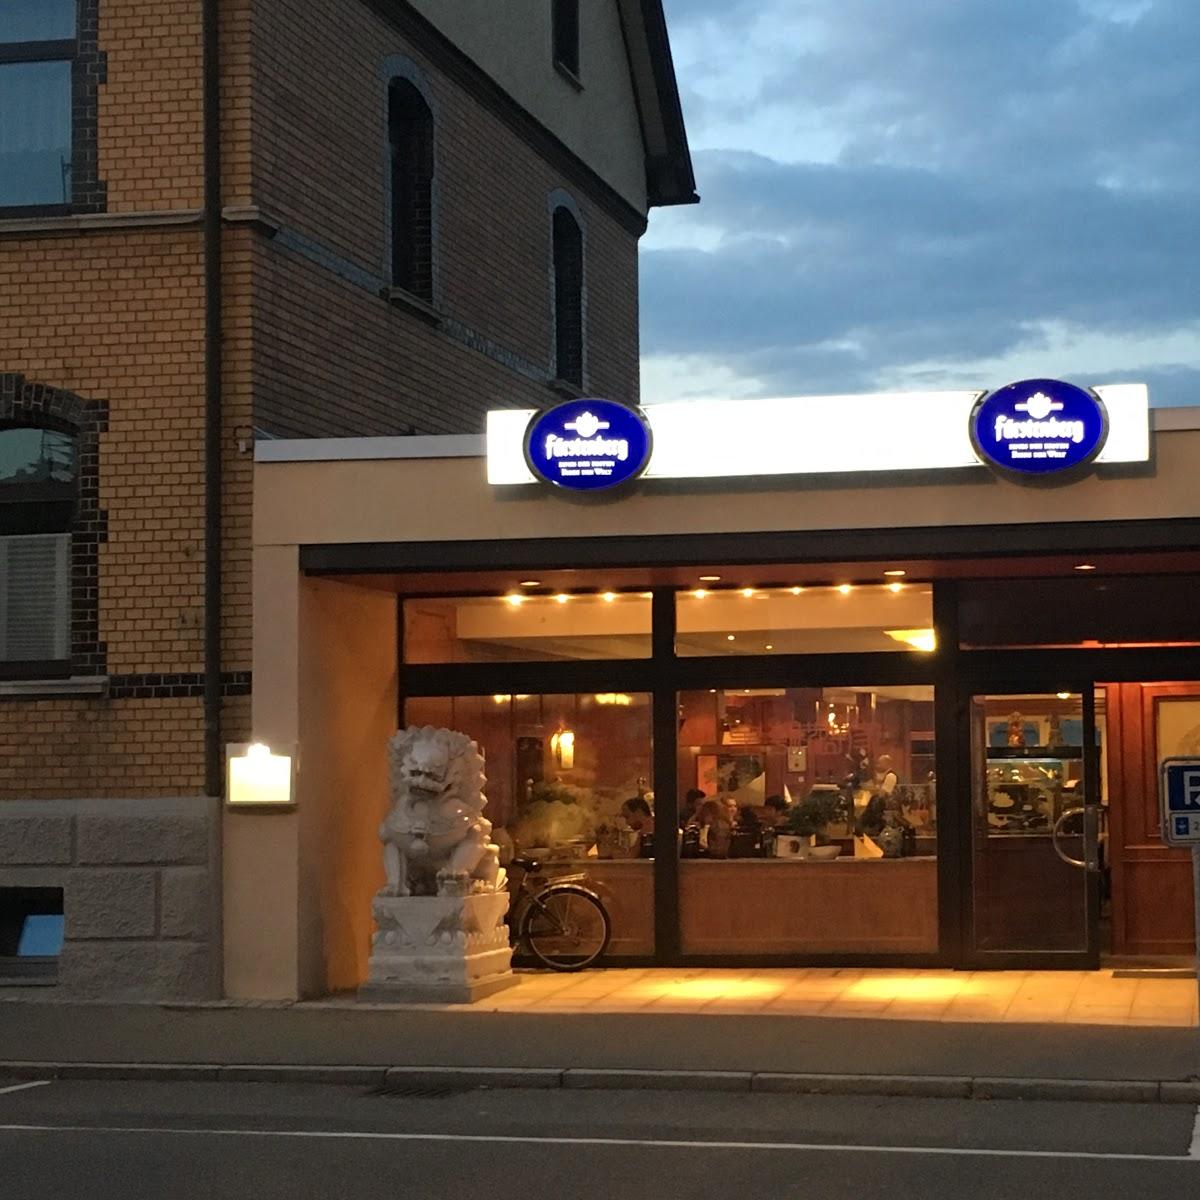 Restaurant "China Restaurant Kings Palace" in  Rottweil